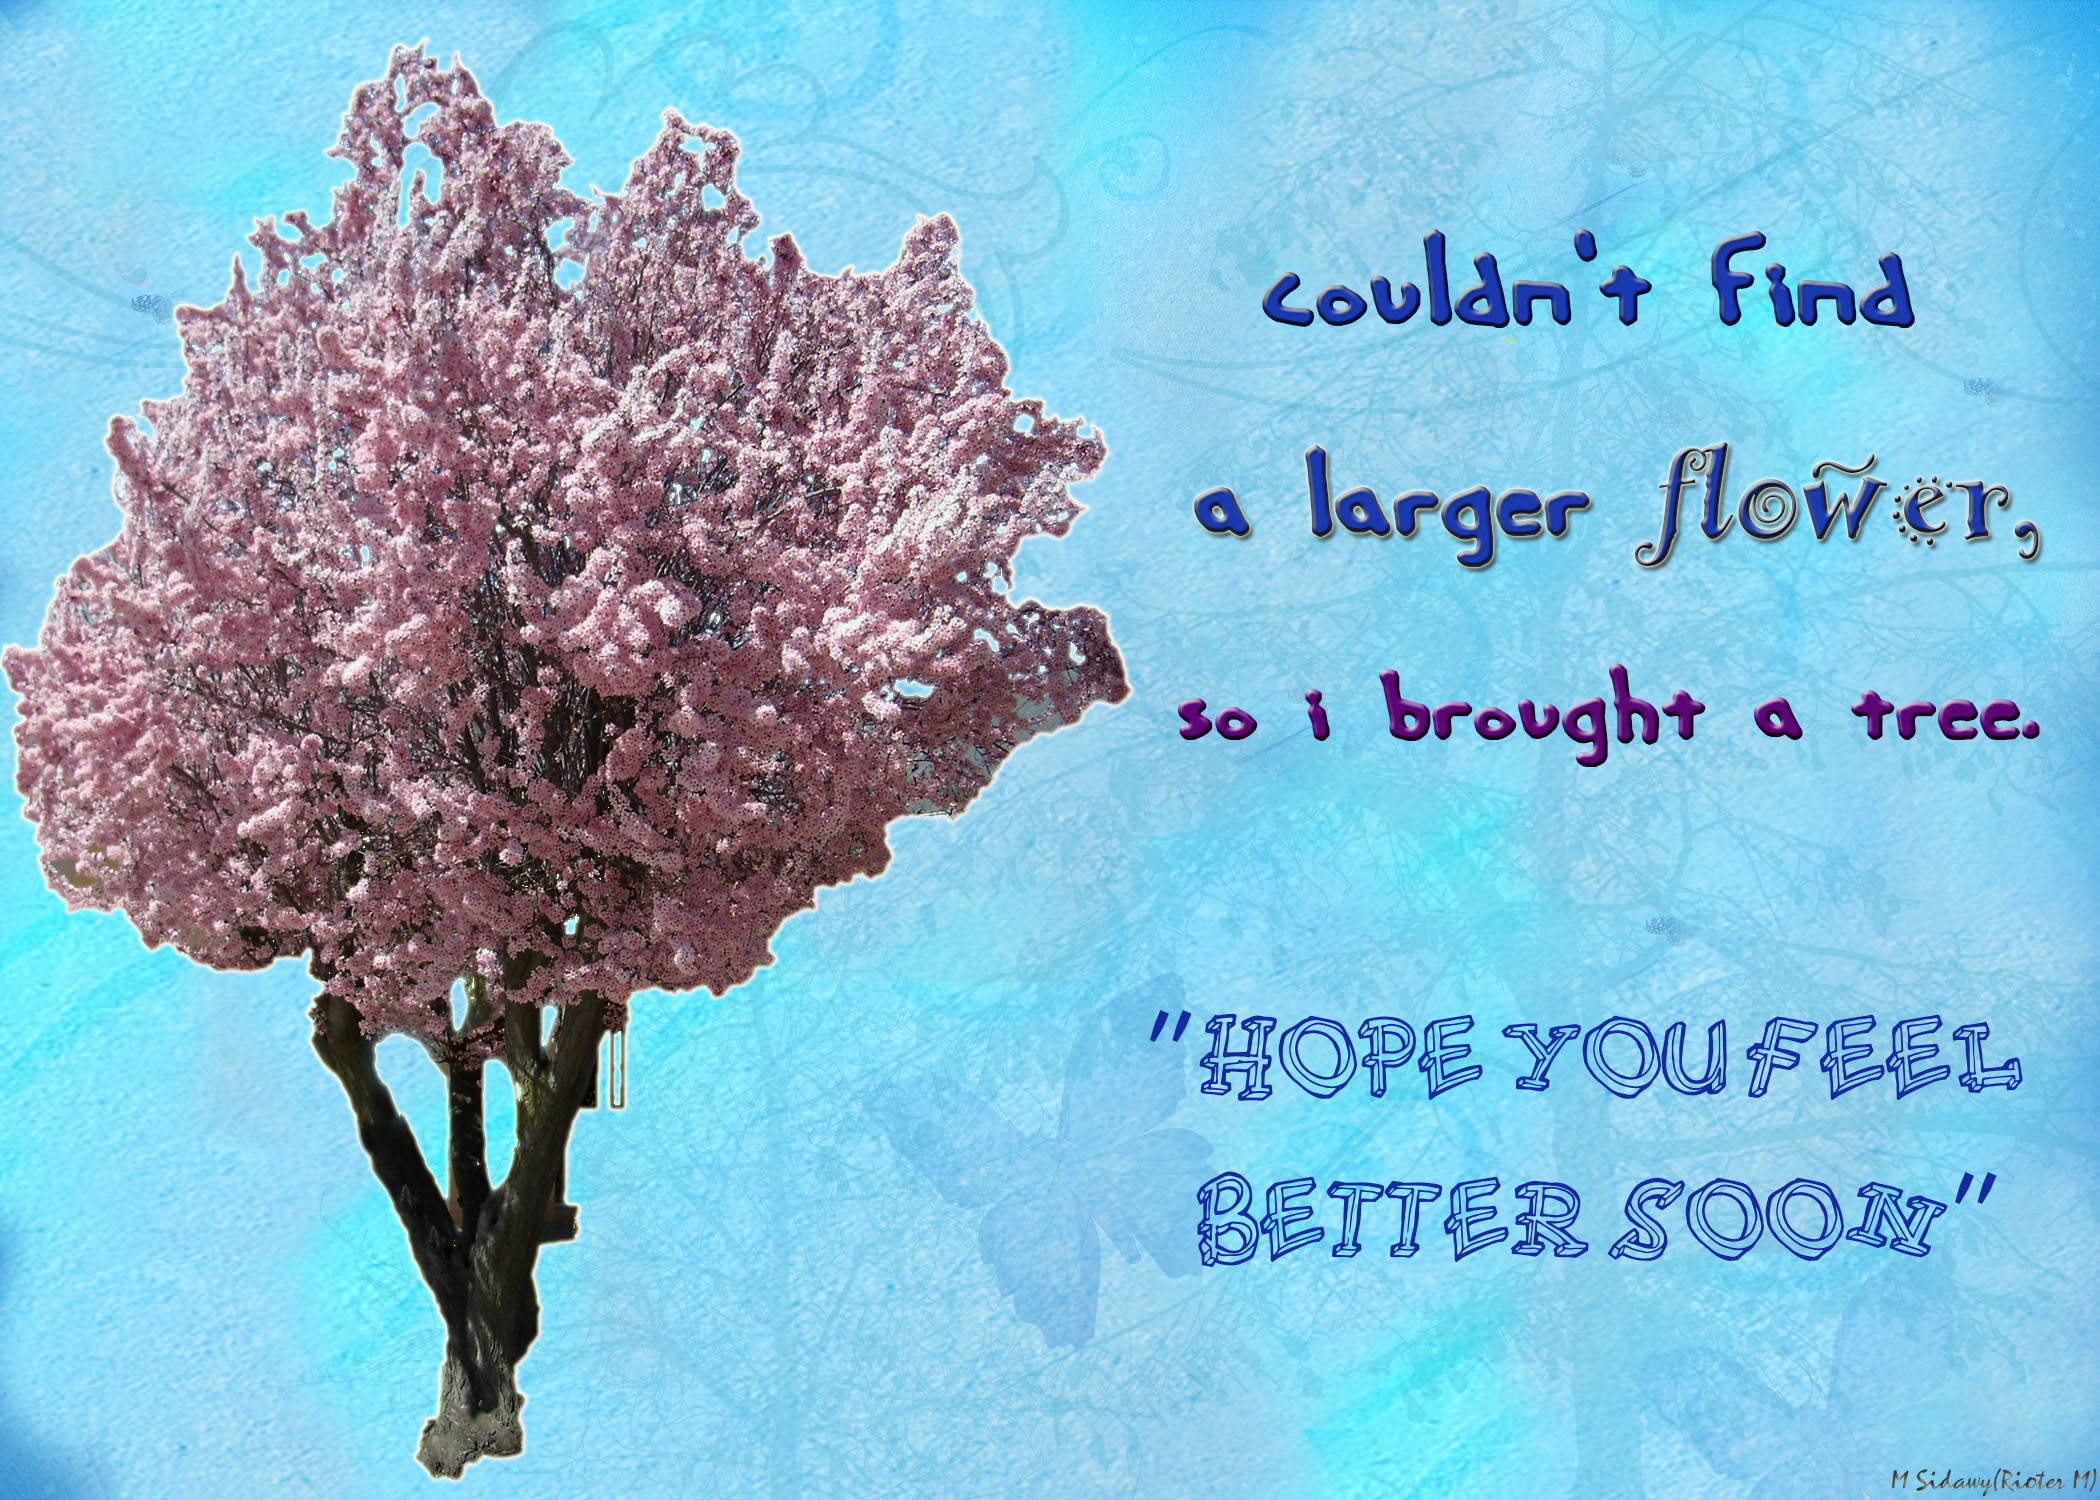 Hope_you_feel_better_soon by Rioter-M